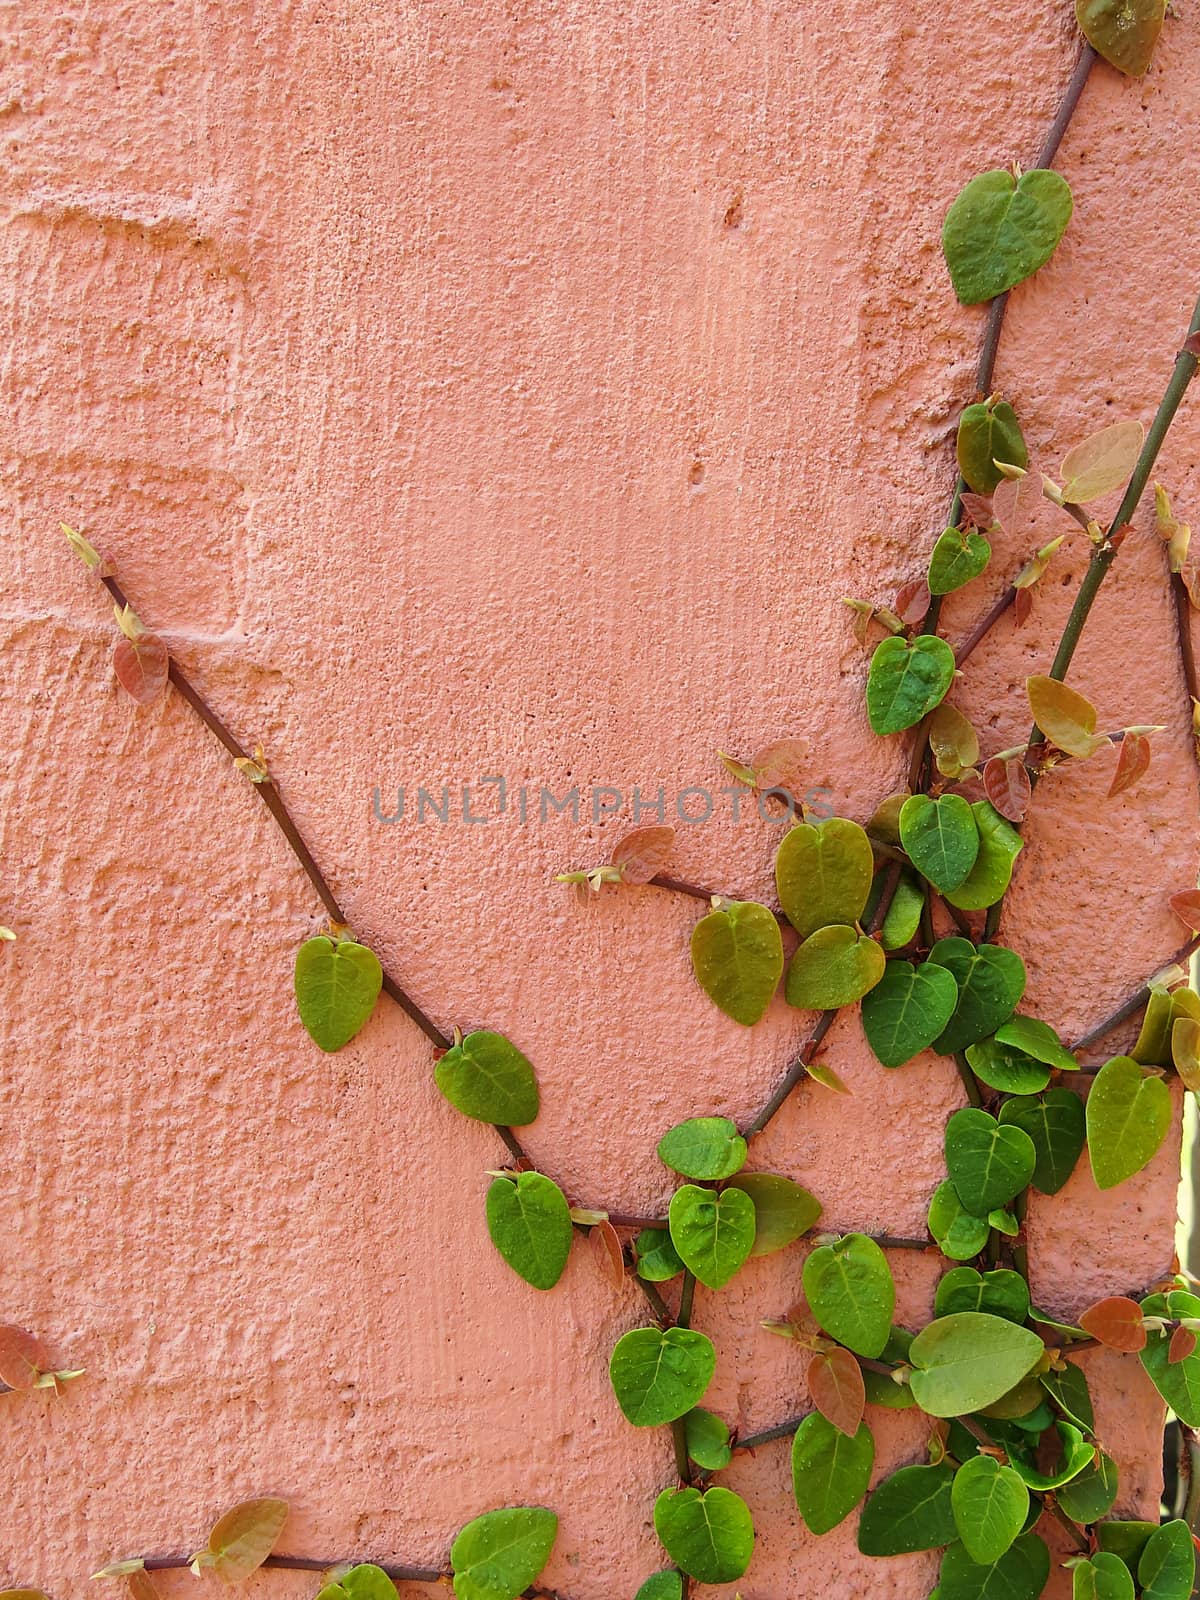 green ivy on pink wall texture background